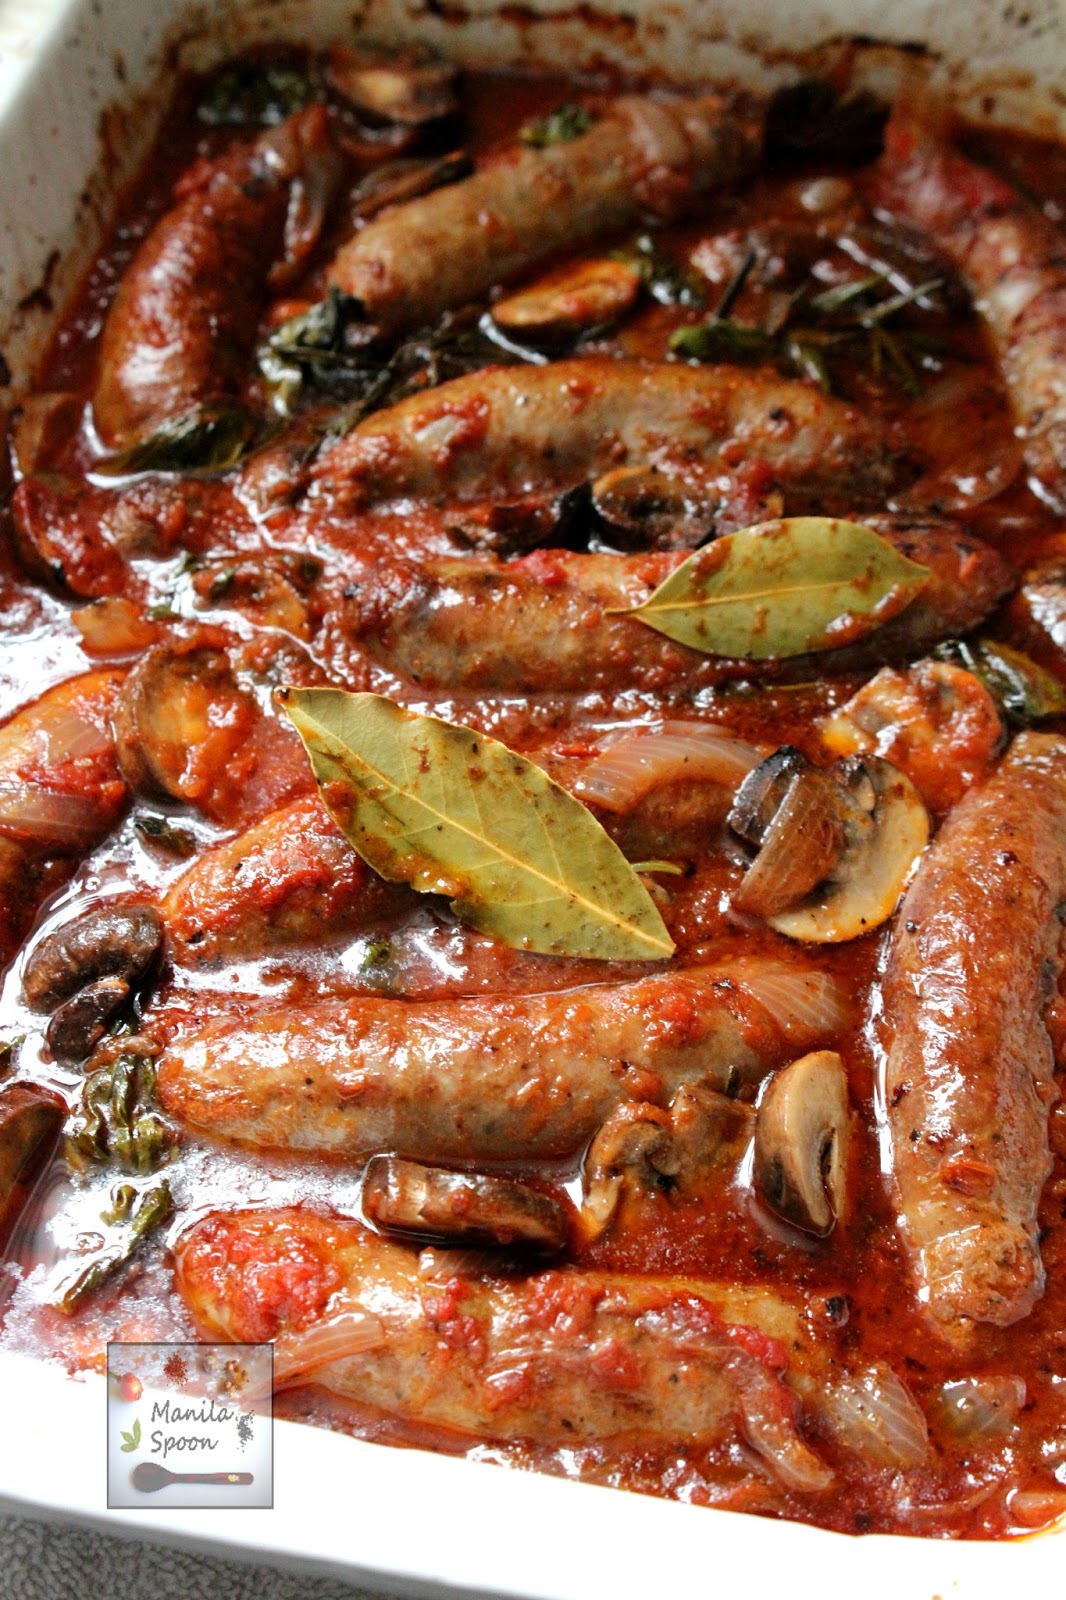  This Italian Sausage Casserole is delicious and loaded with flavors from meat, herbs and vegetables! A healthy and yummy option for those in a gluten-free and low-carb diet, too!